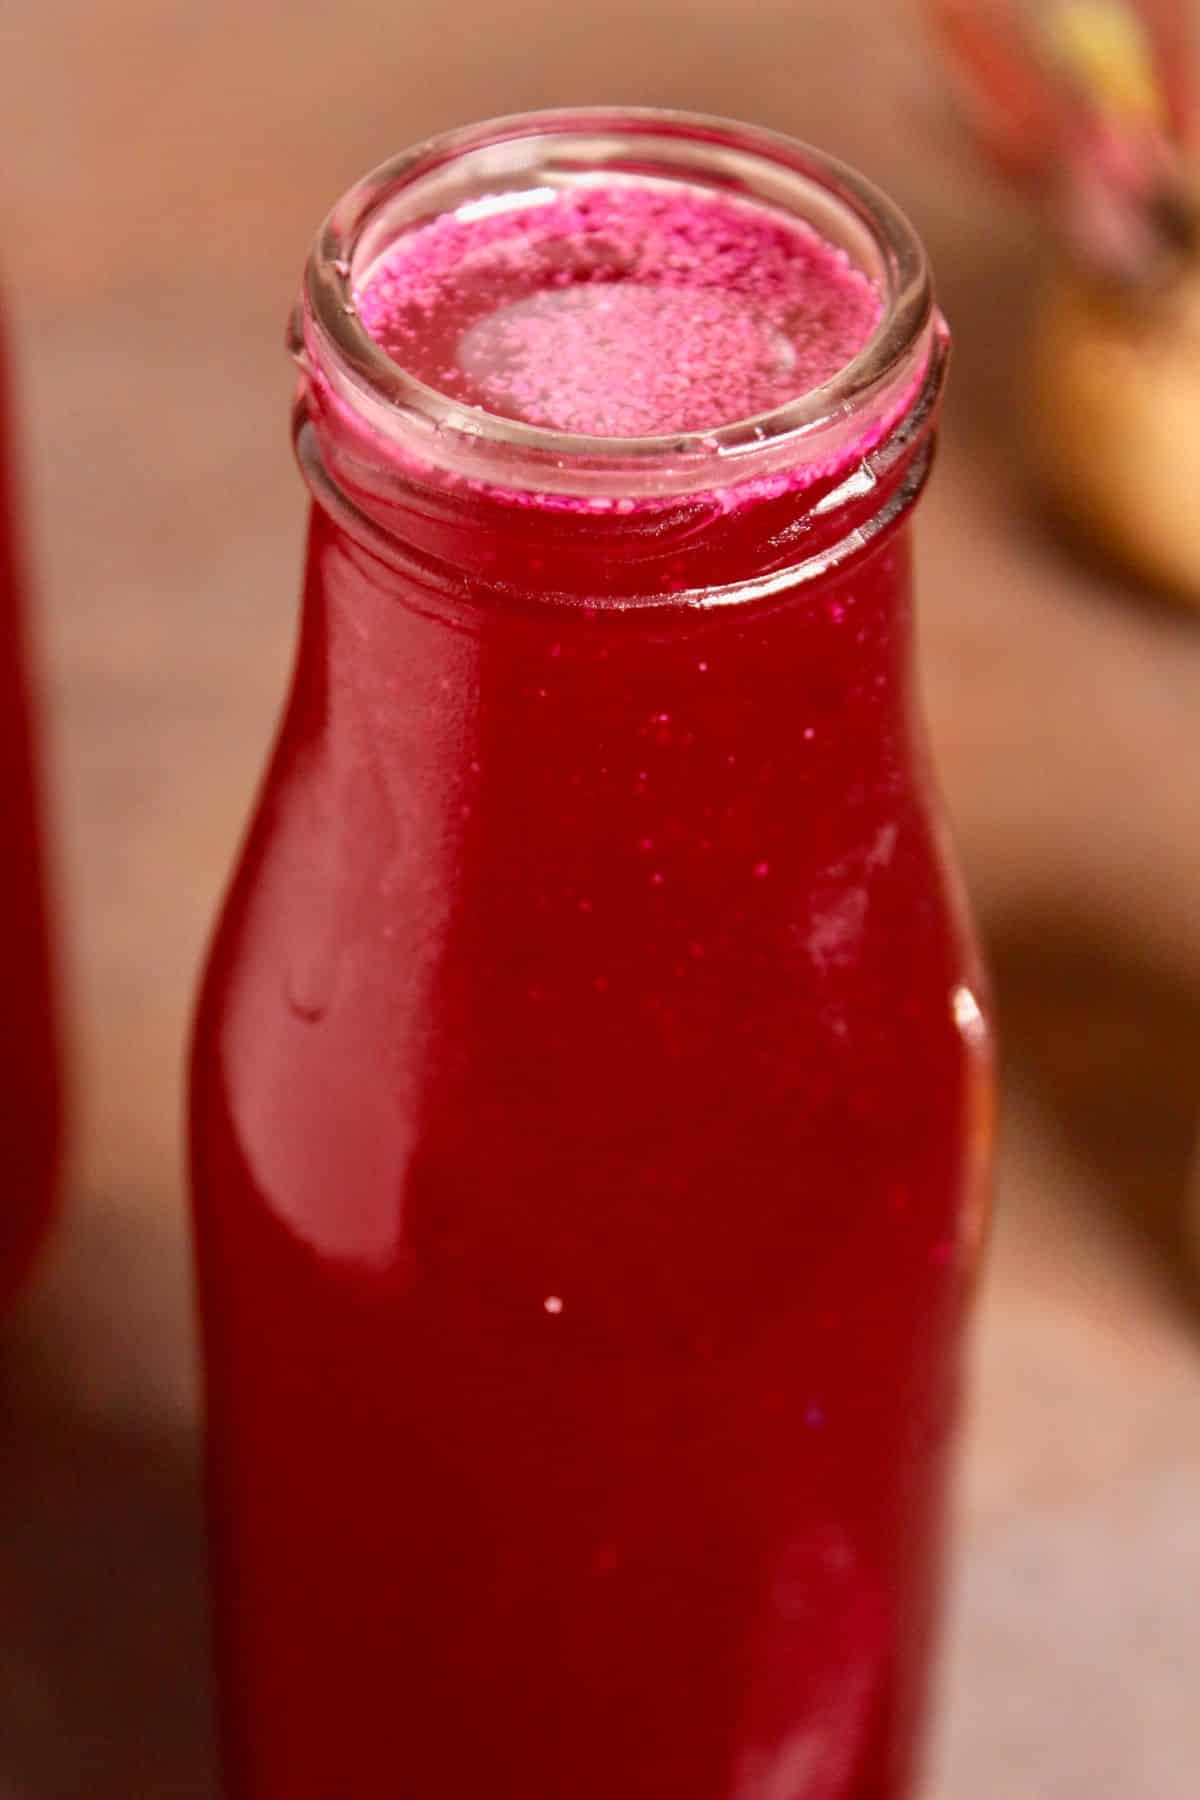 tasty carrot and beetroot probiotic drink